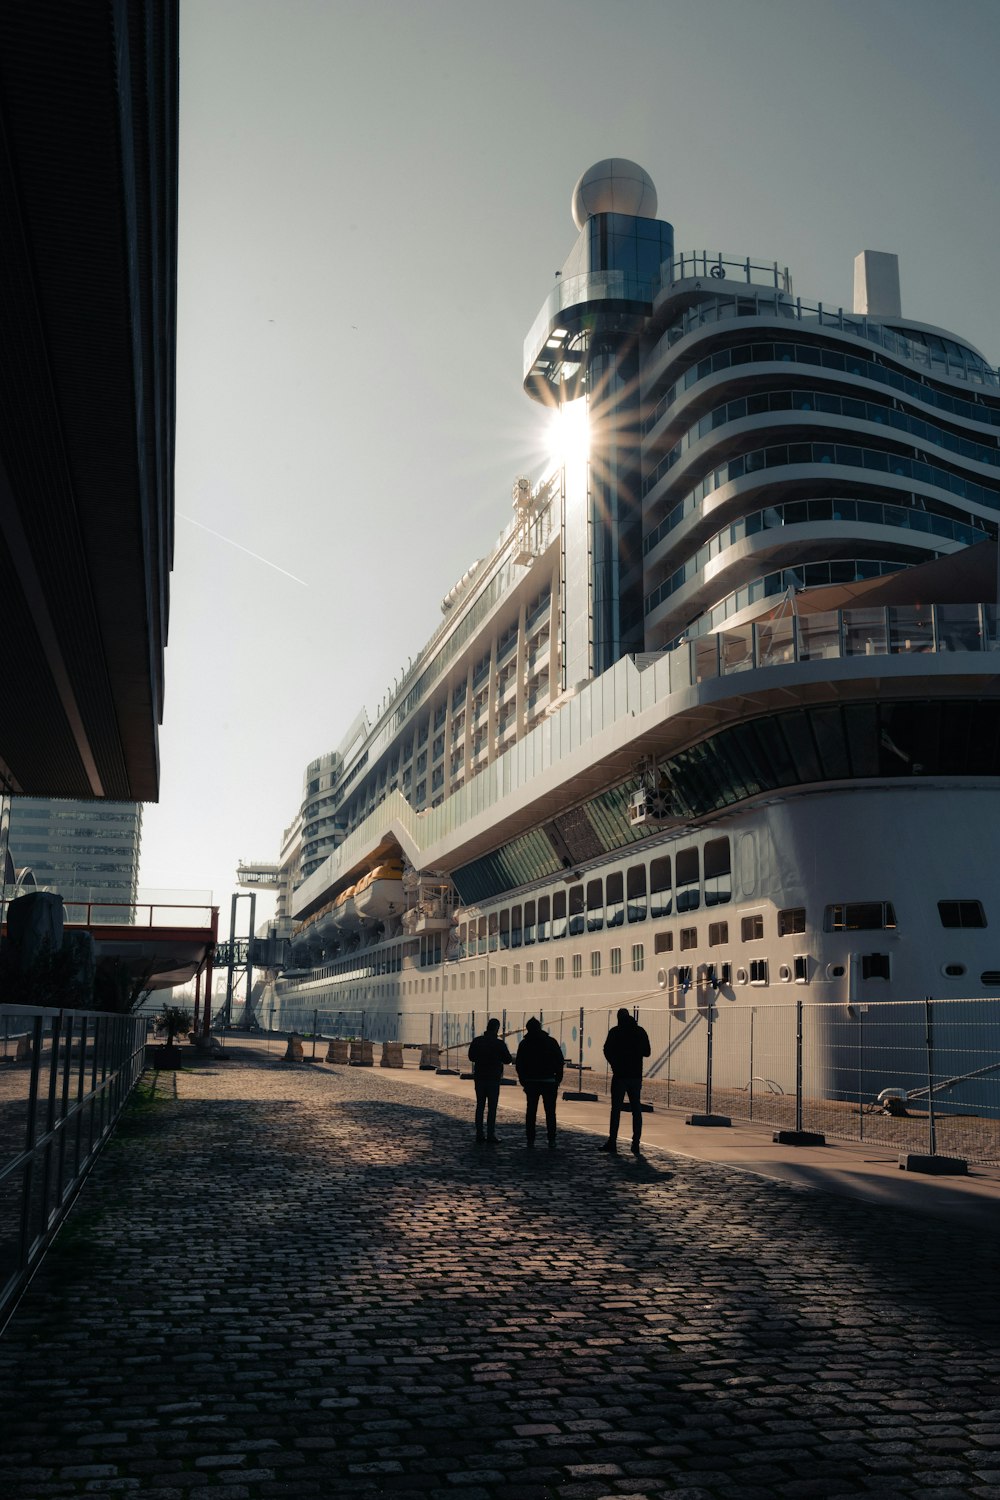 a group of people walking down a street next to a cruise ship